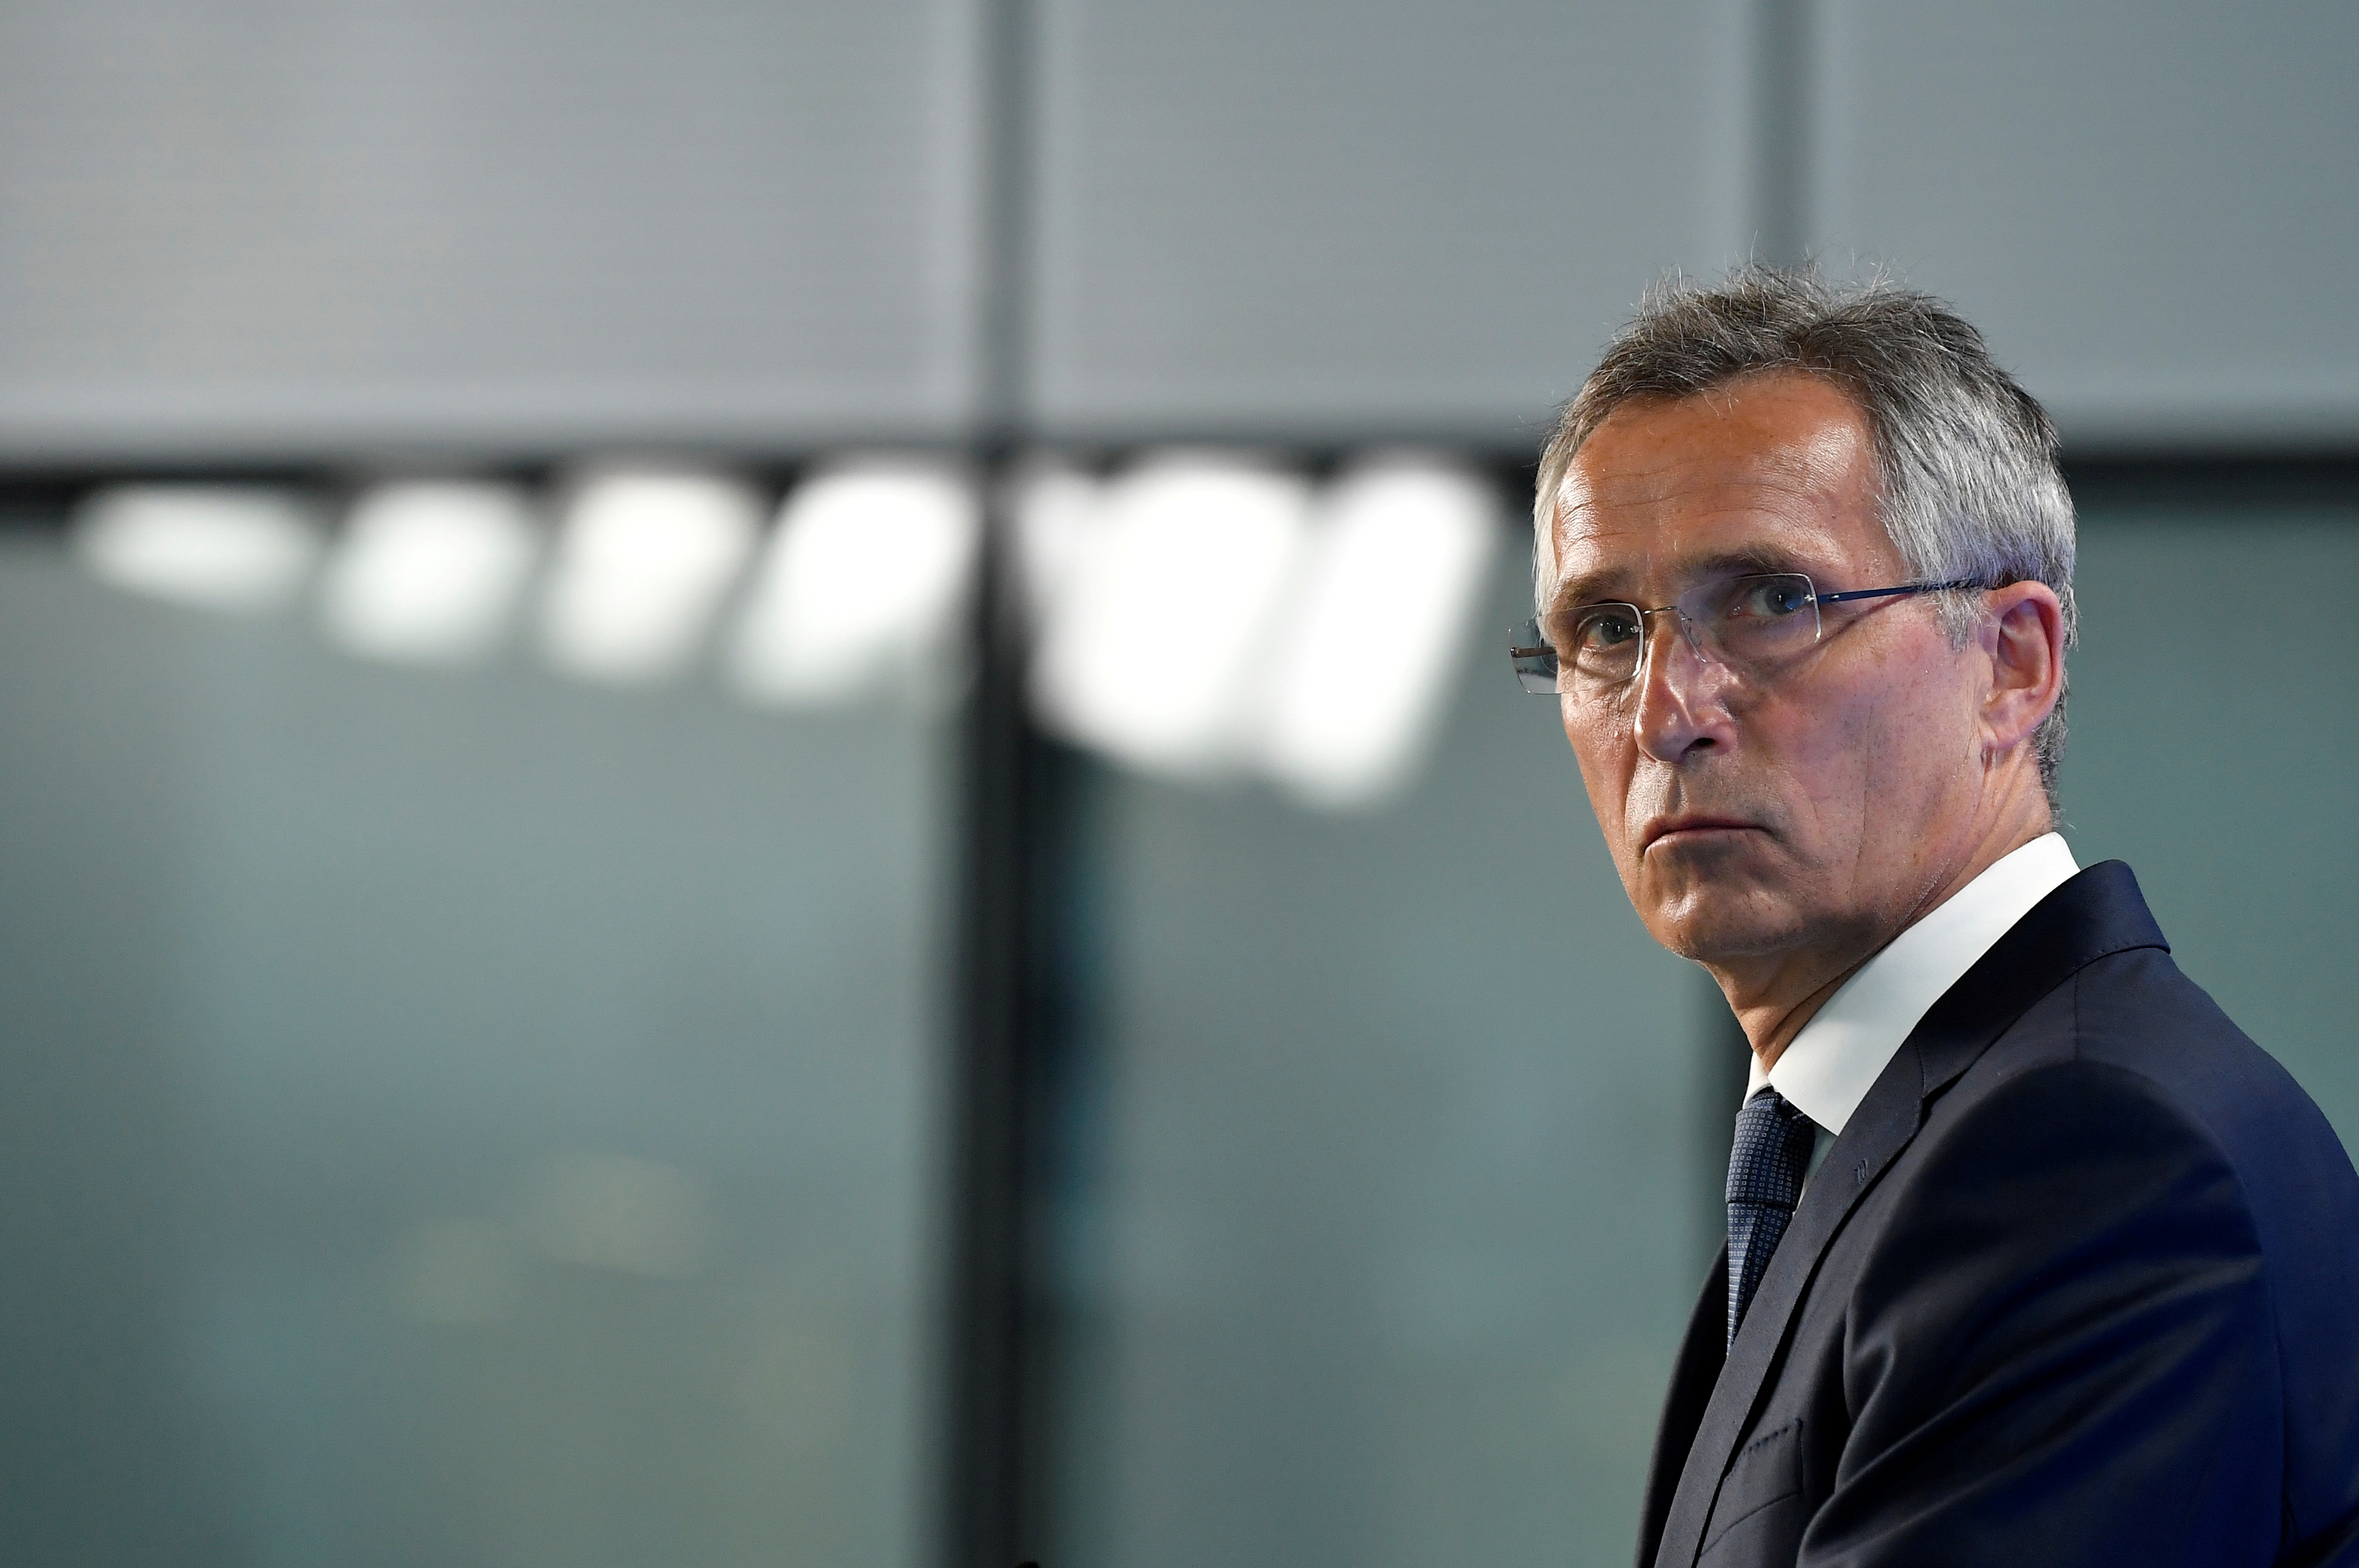 NATO Secretary General Jens Stoltenberg attends a news conference in Brussels